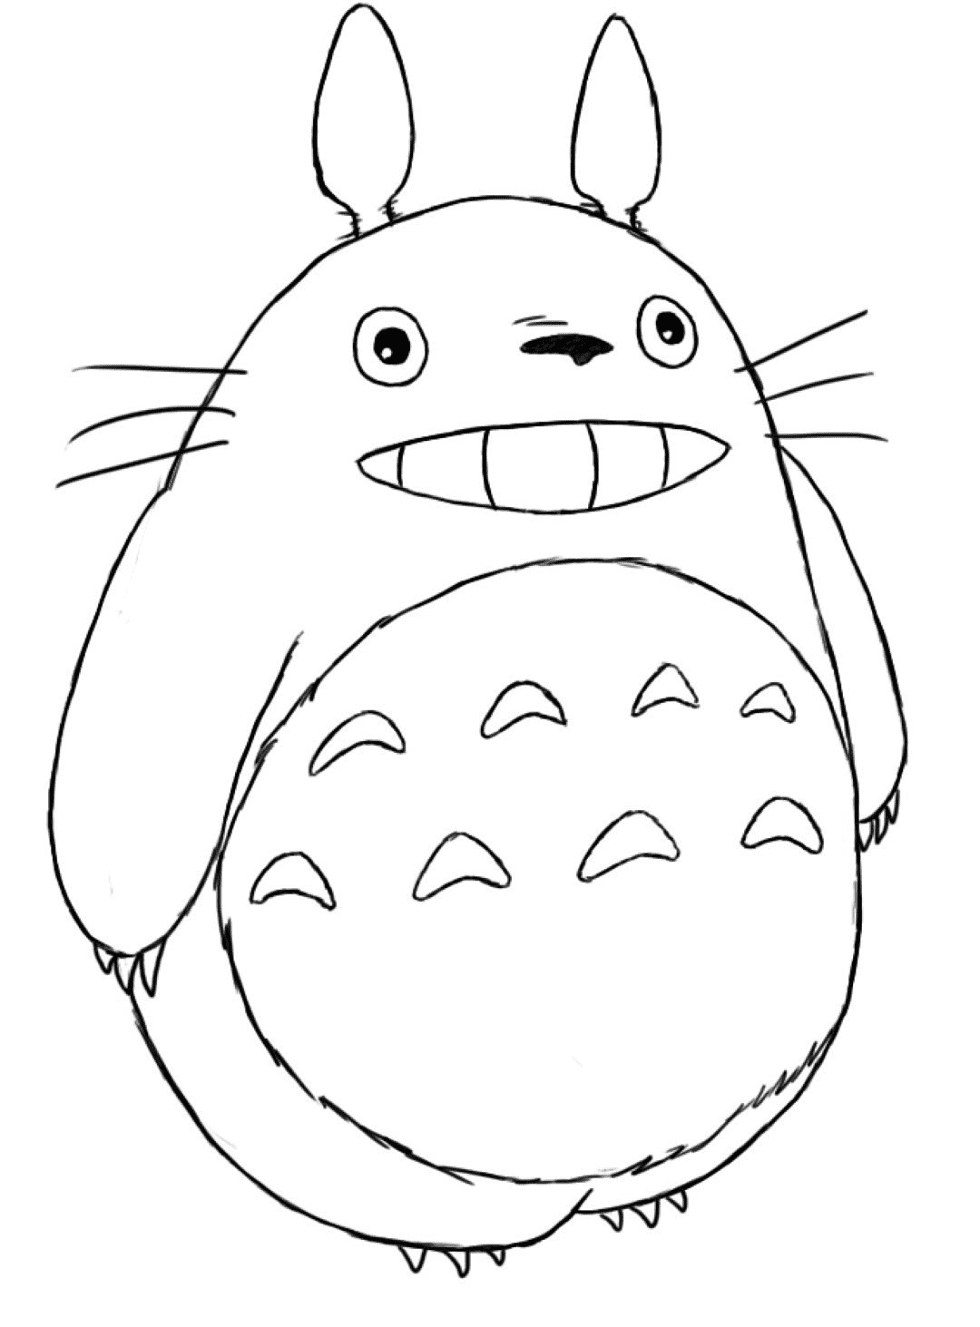 Totoro Smiling Coloring Page